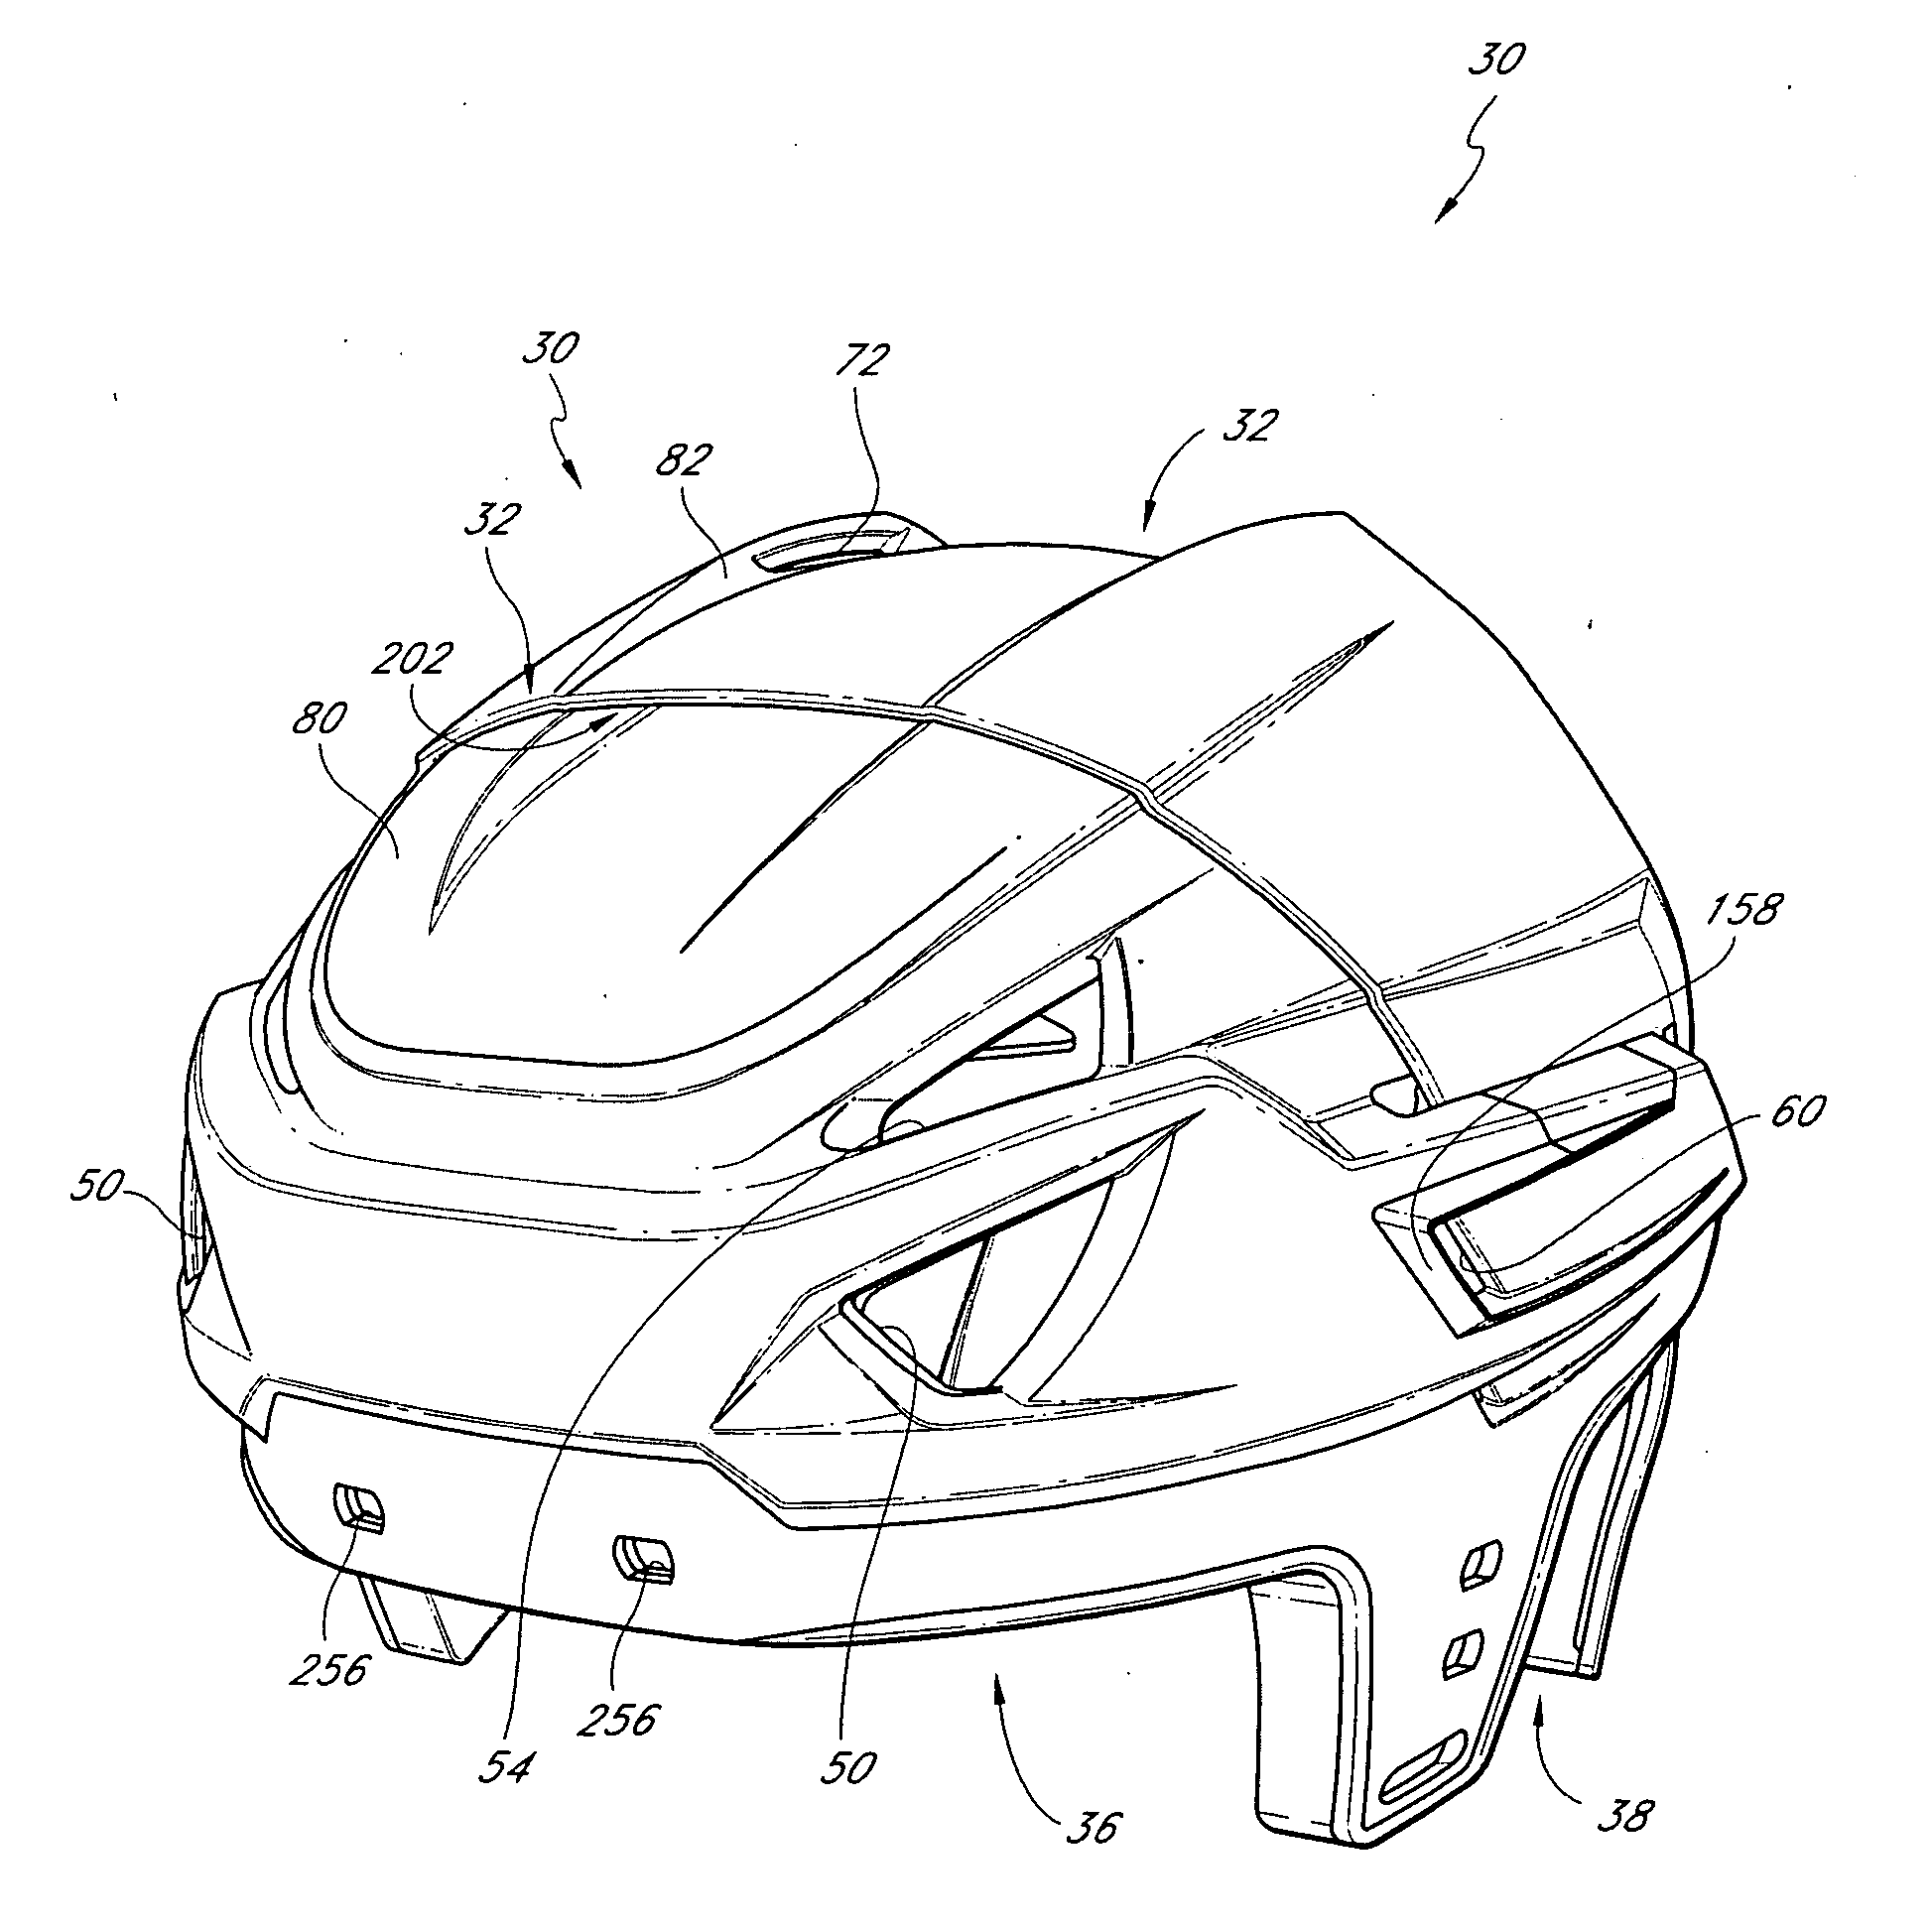 Helmet for a hockey or lacrosse player